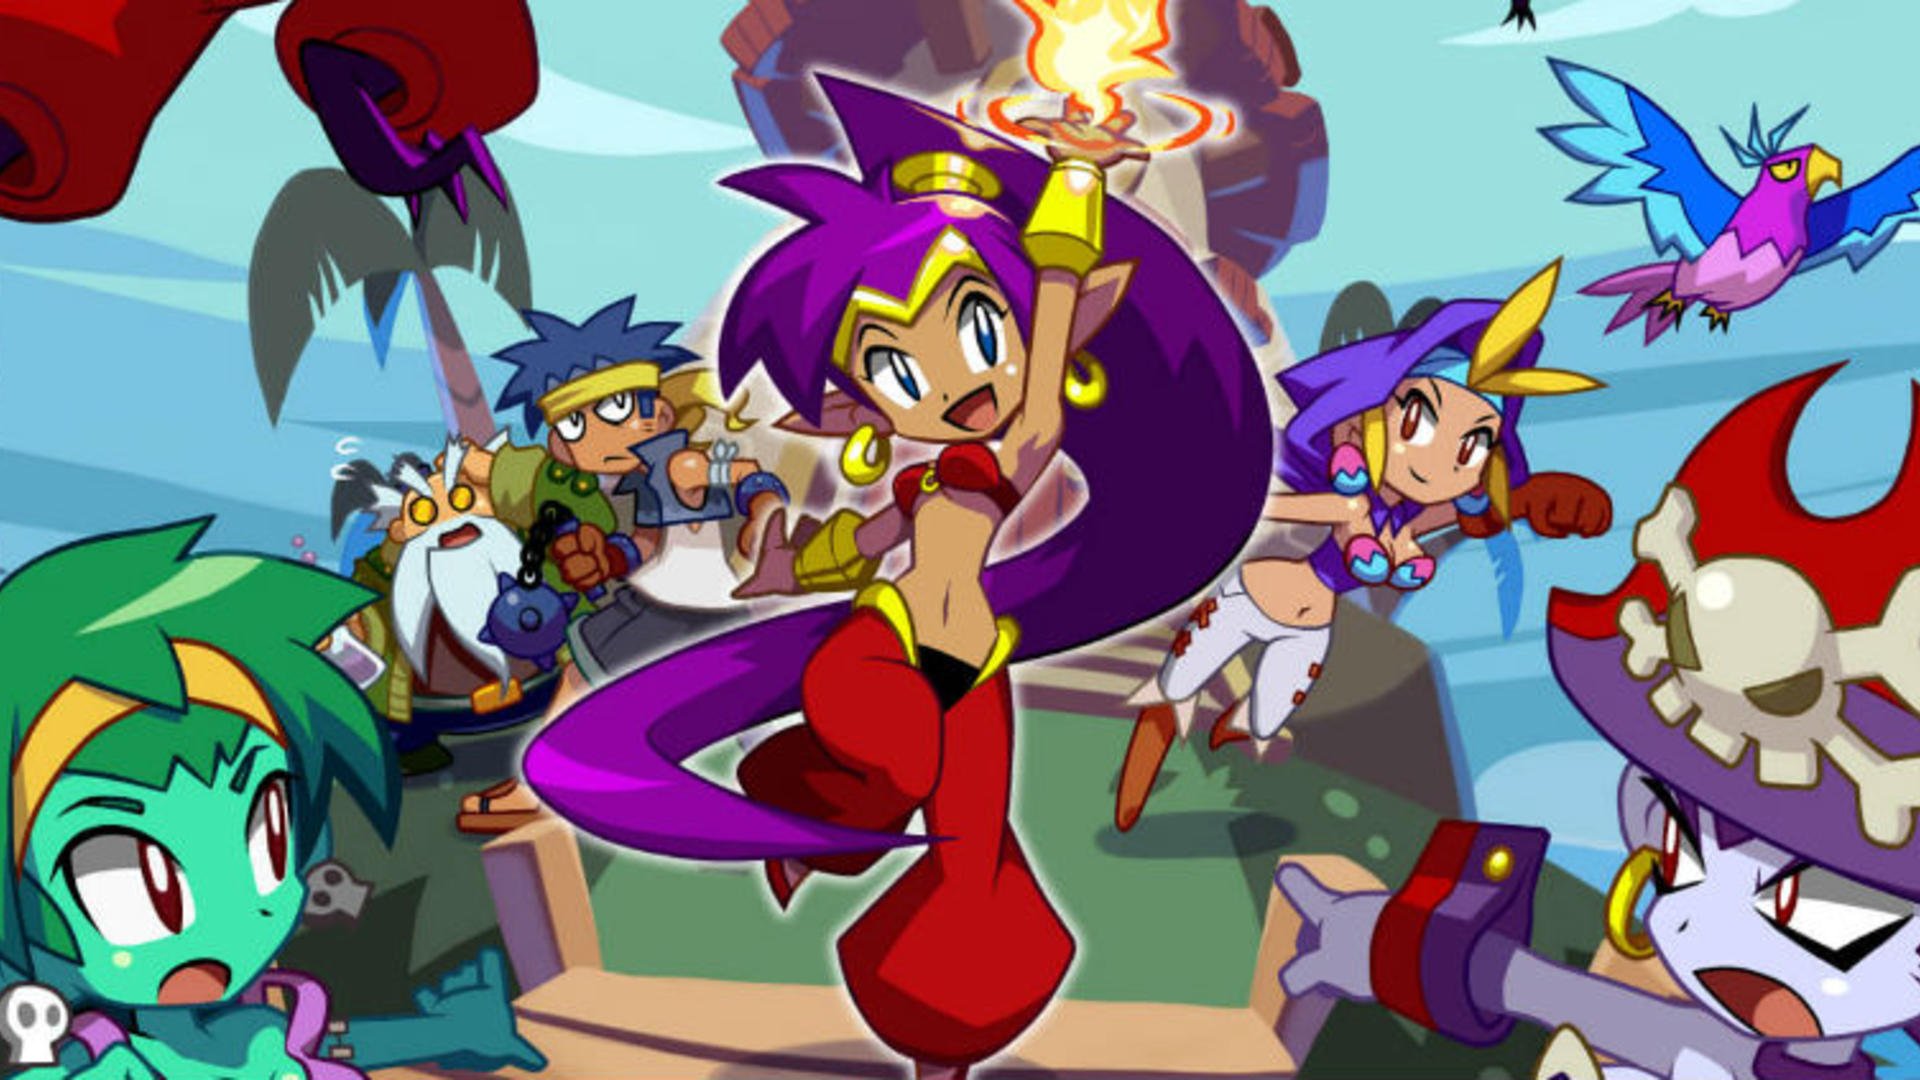 Shantae official promotional image - MobyGames